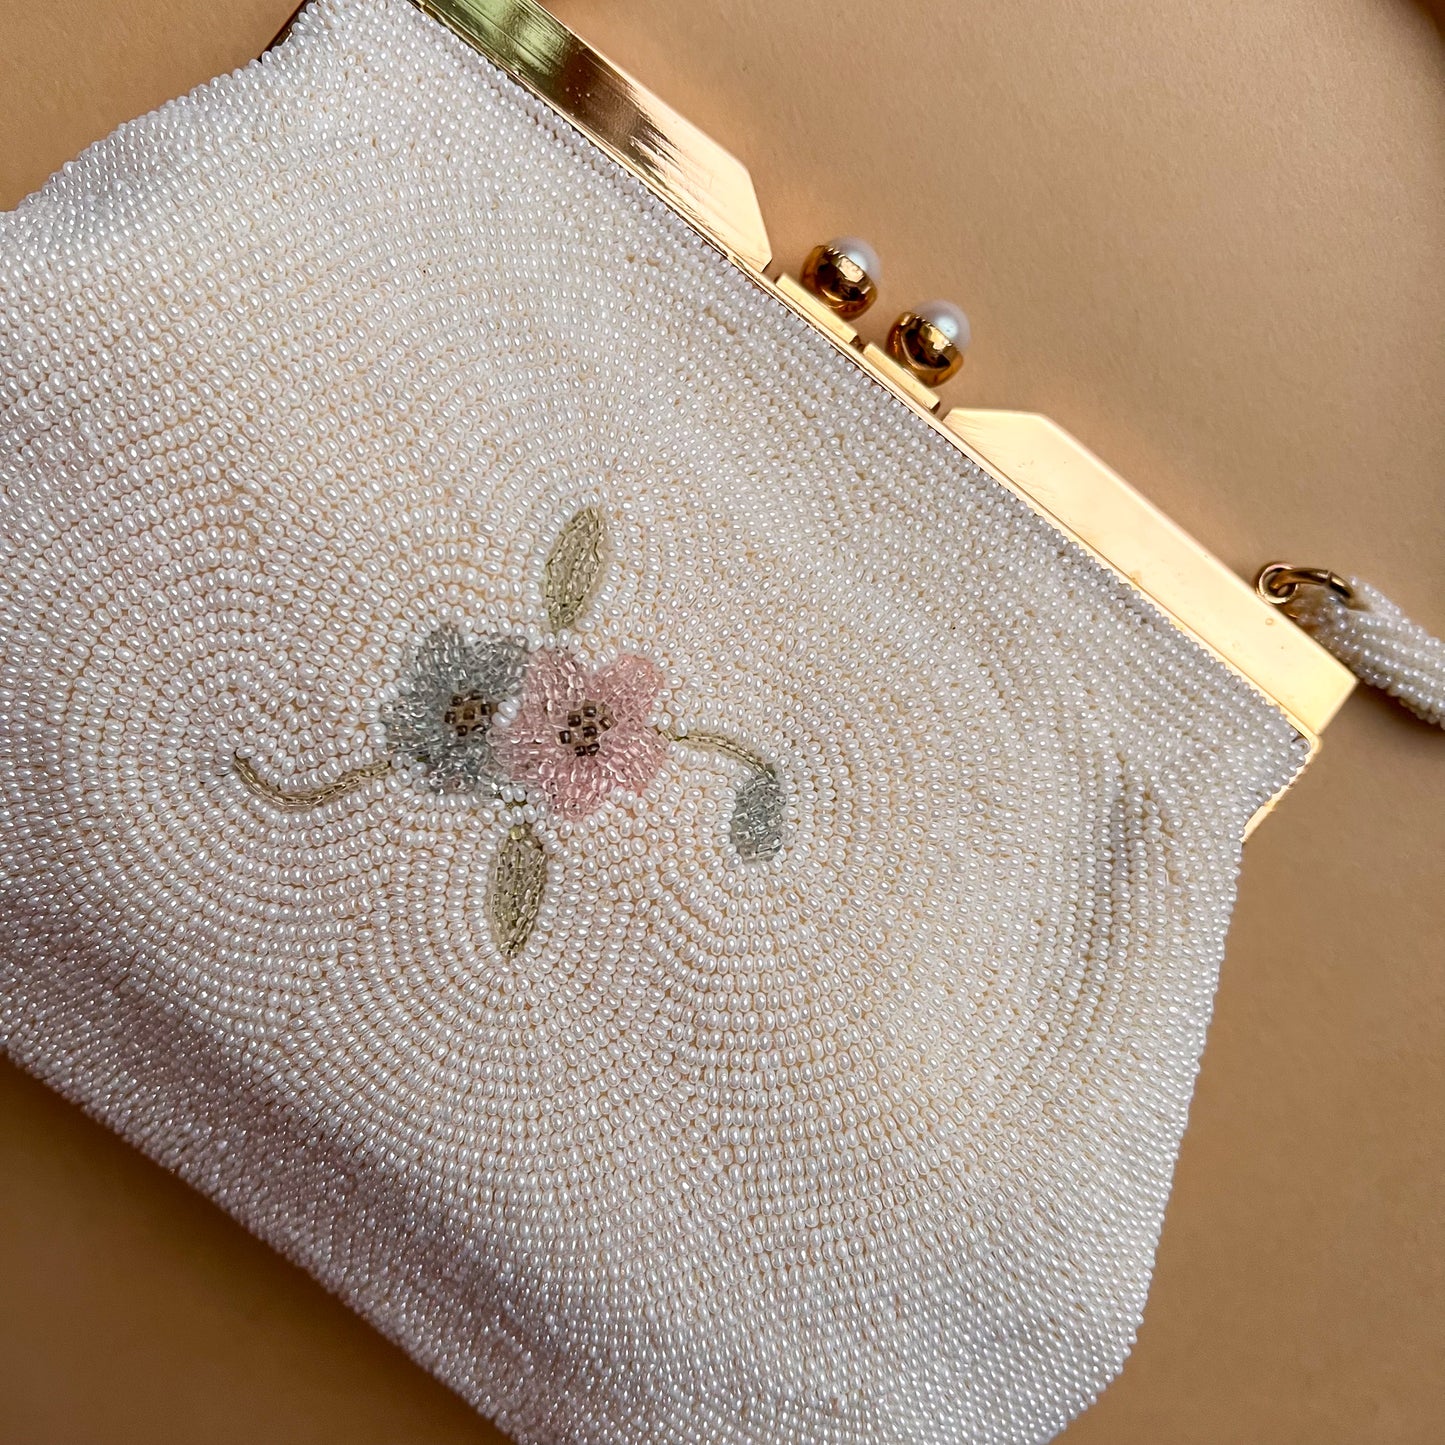 1960s White Floral Beaded Handbag With Mother of Pearl